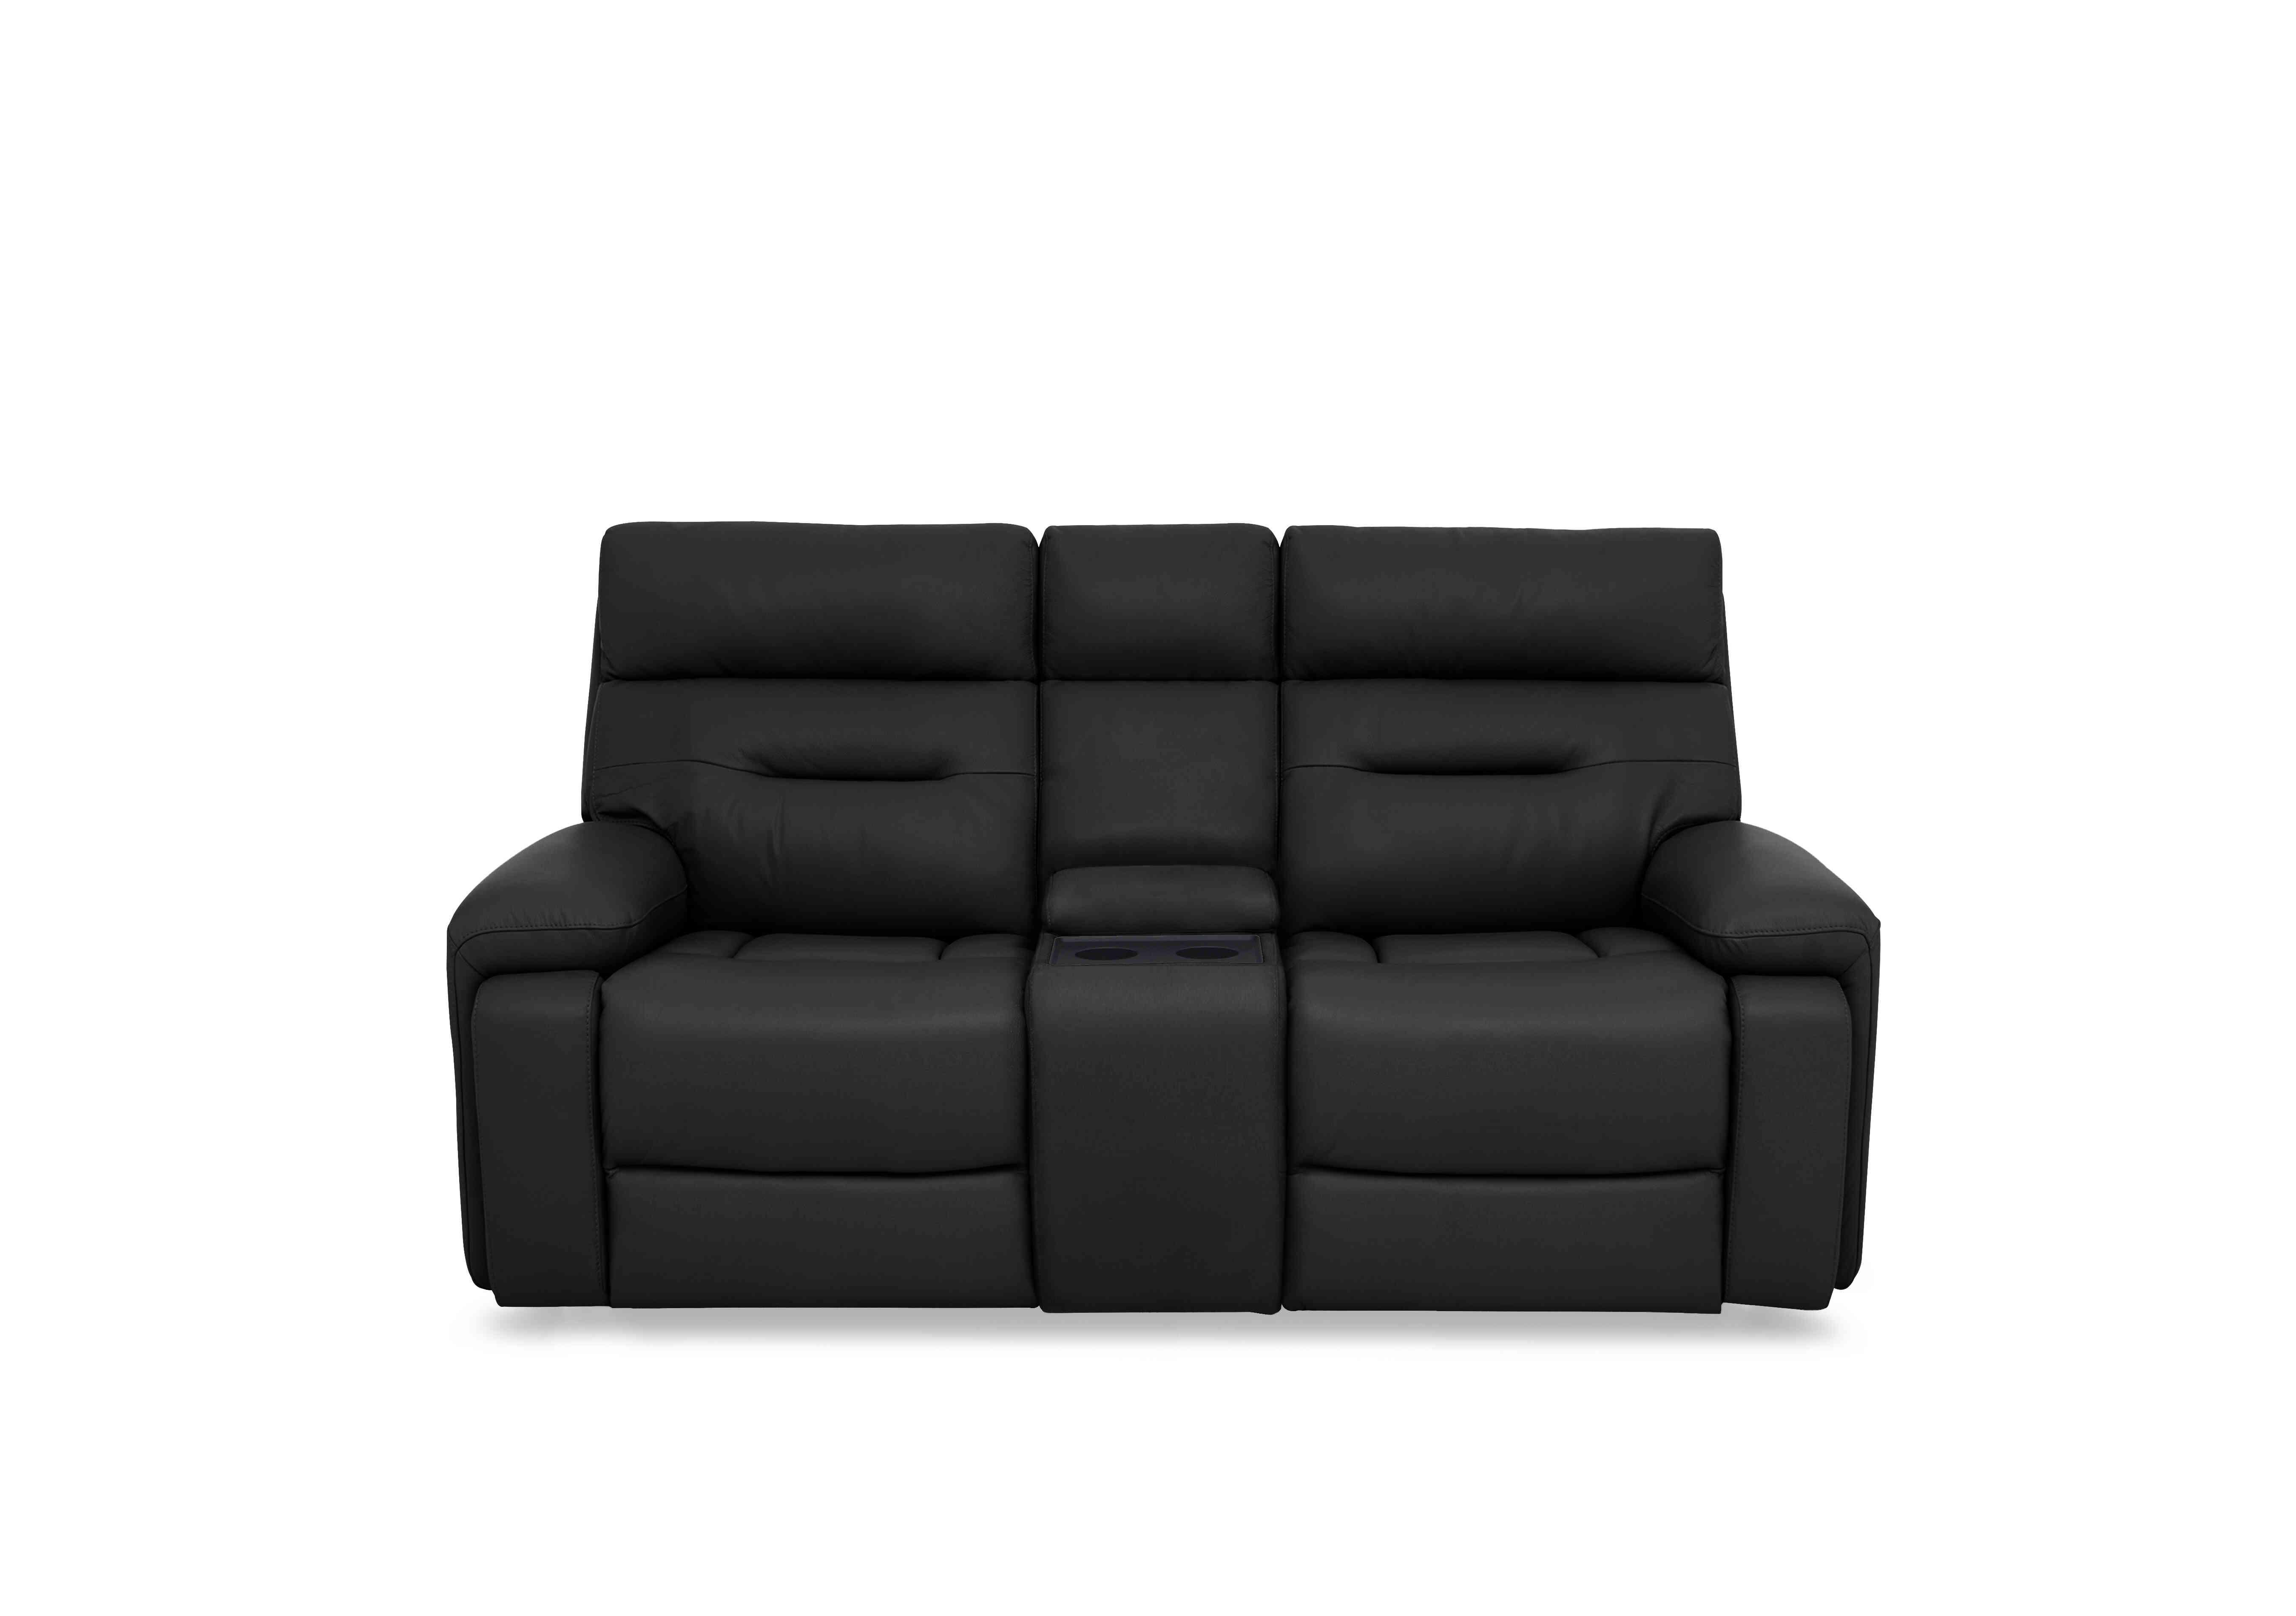 Cinemax Media 2 Seater Leather Power Recliner Sofa with Power Headrests in La4820 Natural Black Mica on Furniture Village